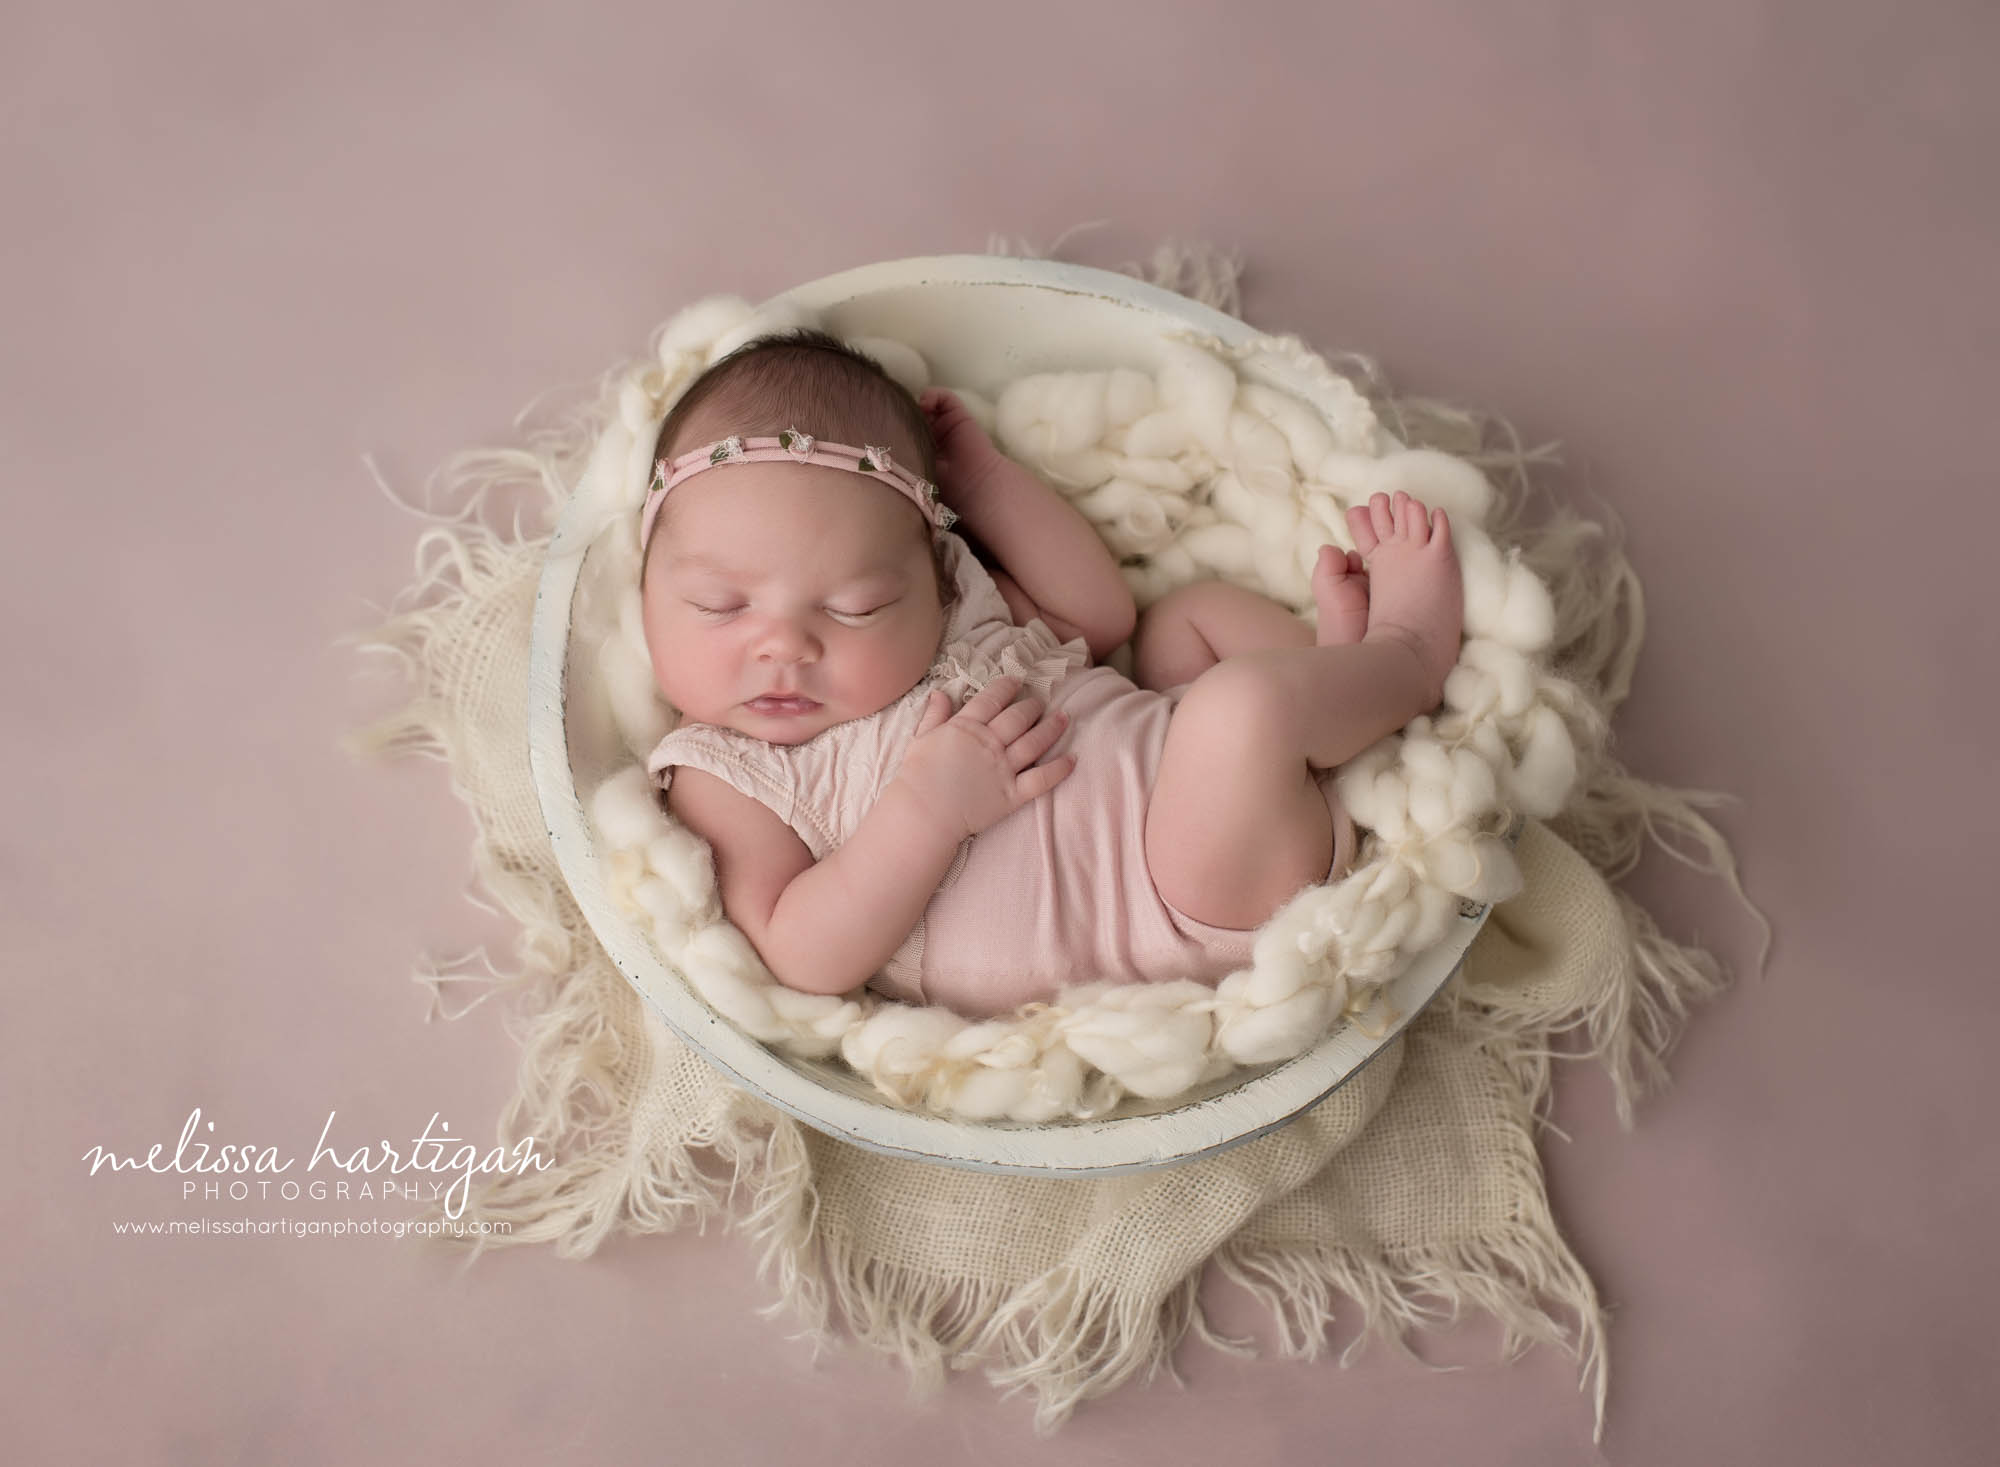 newborn baby girl wearing pink outfit posed in wooden cream bowl CT newborn photography